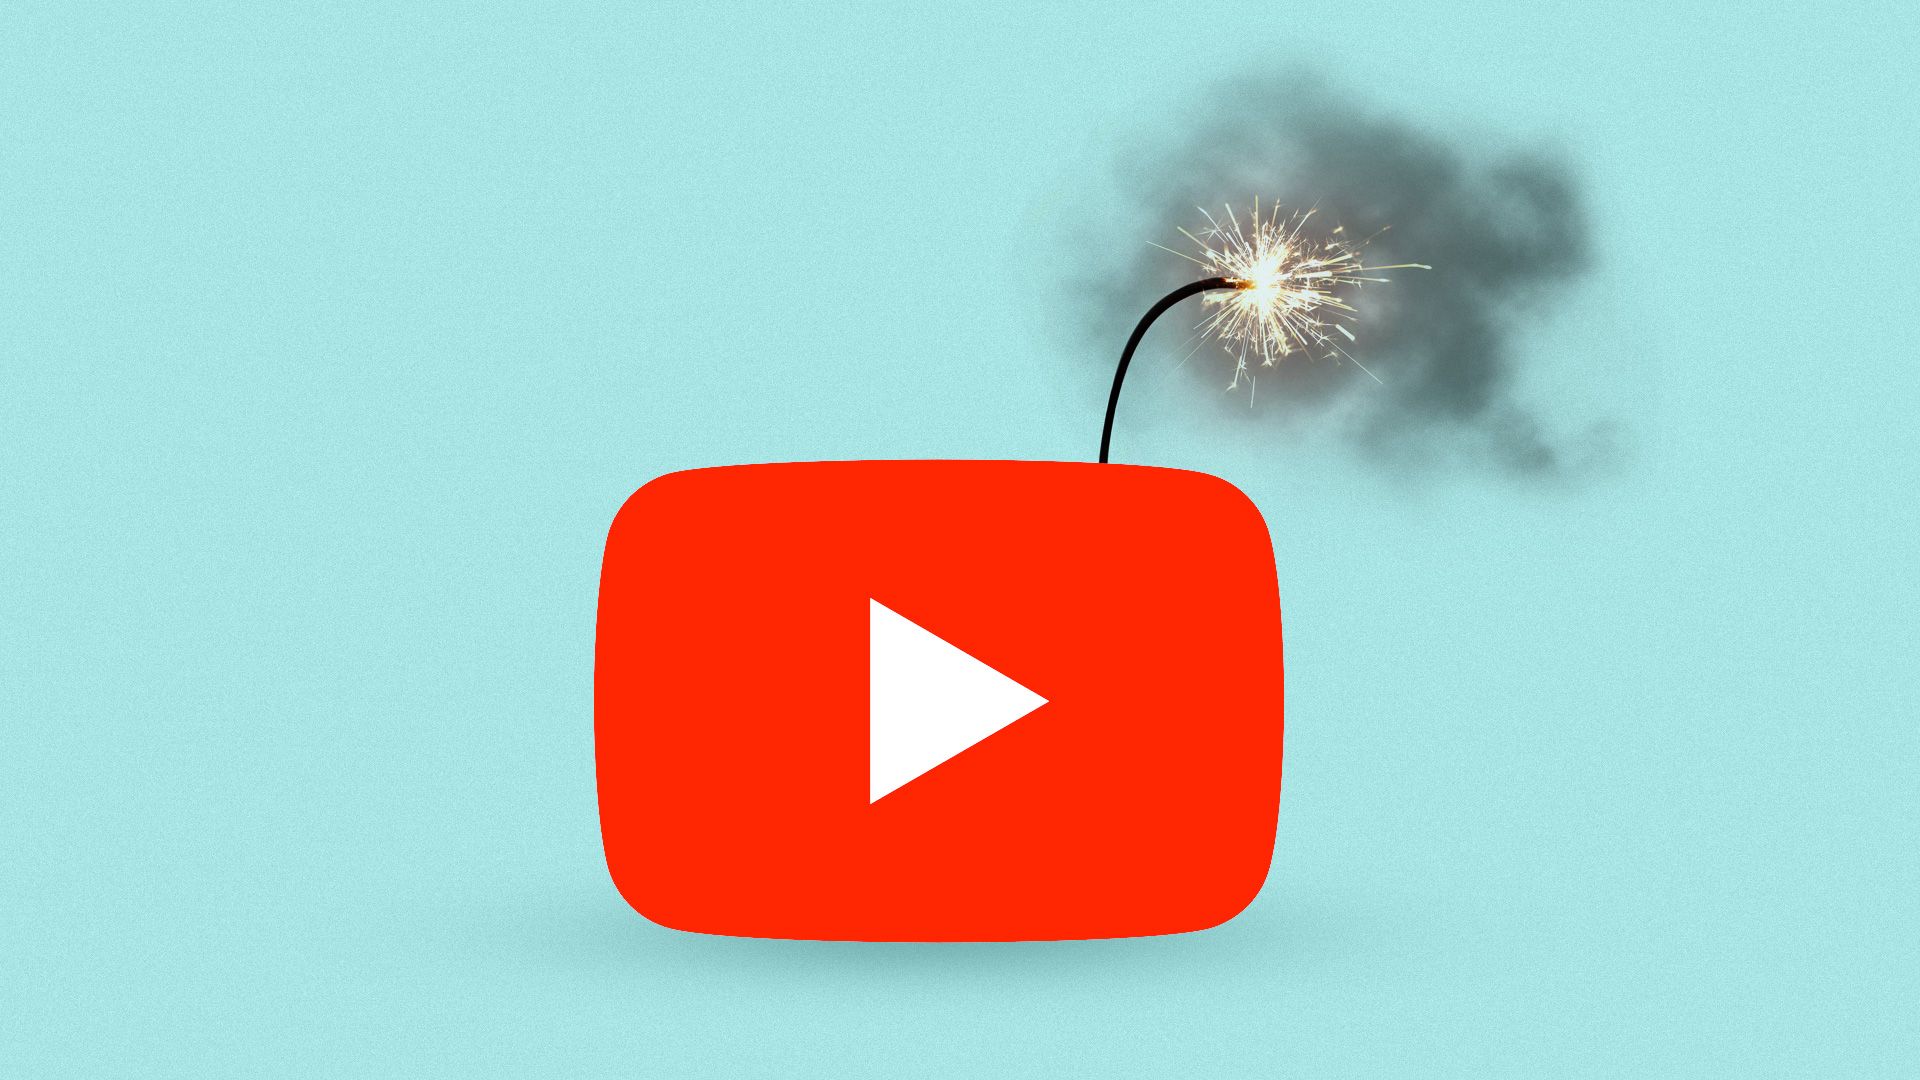 This illustration shows the YouTube "play button" logo with a lit fuse on top.